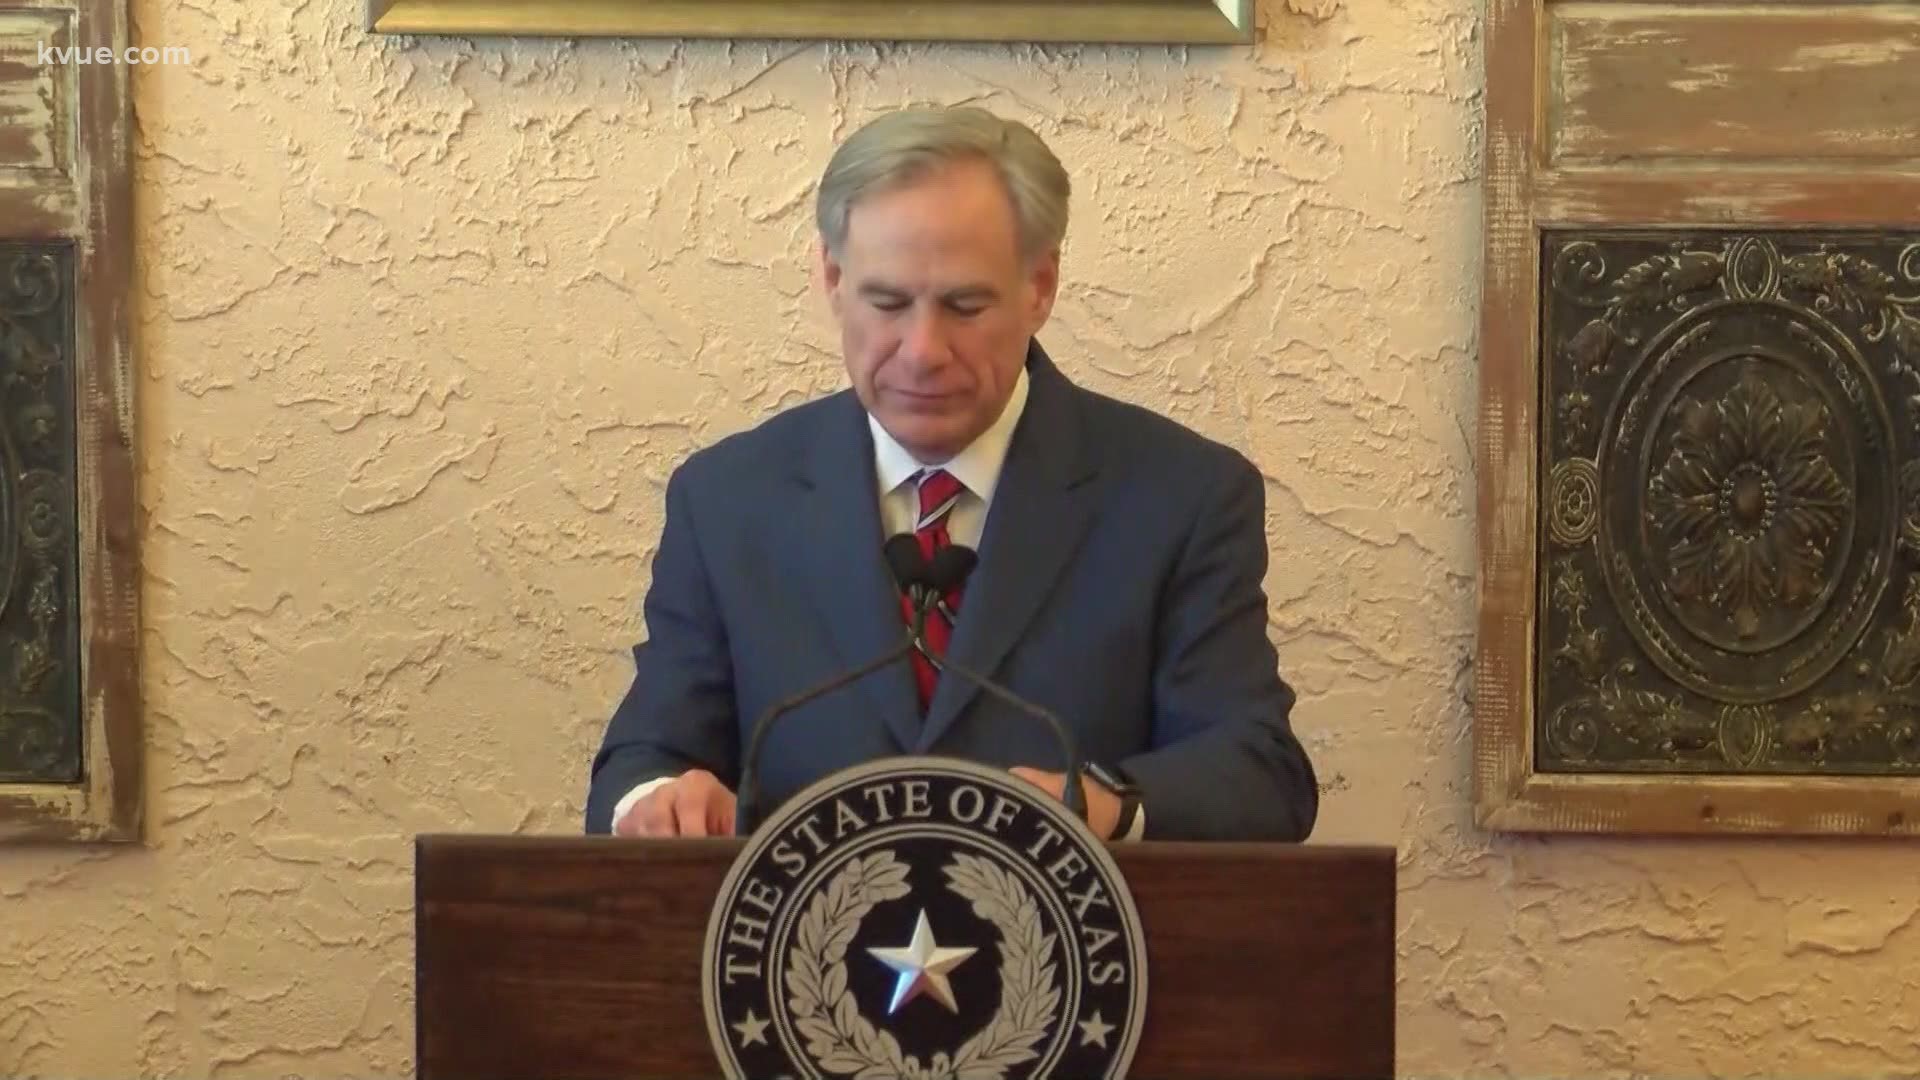 Some top state health officials say Gov. Abbott did not consult with them before announcing his rollback in COVID-19 restrictions.